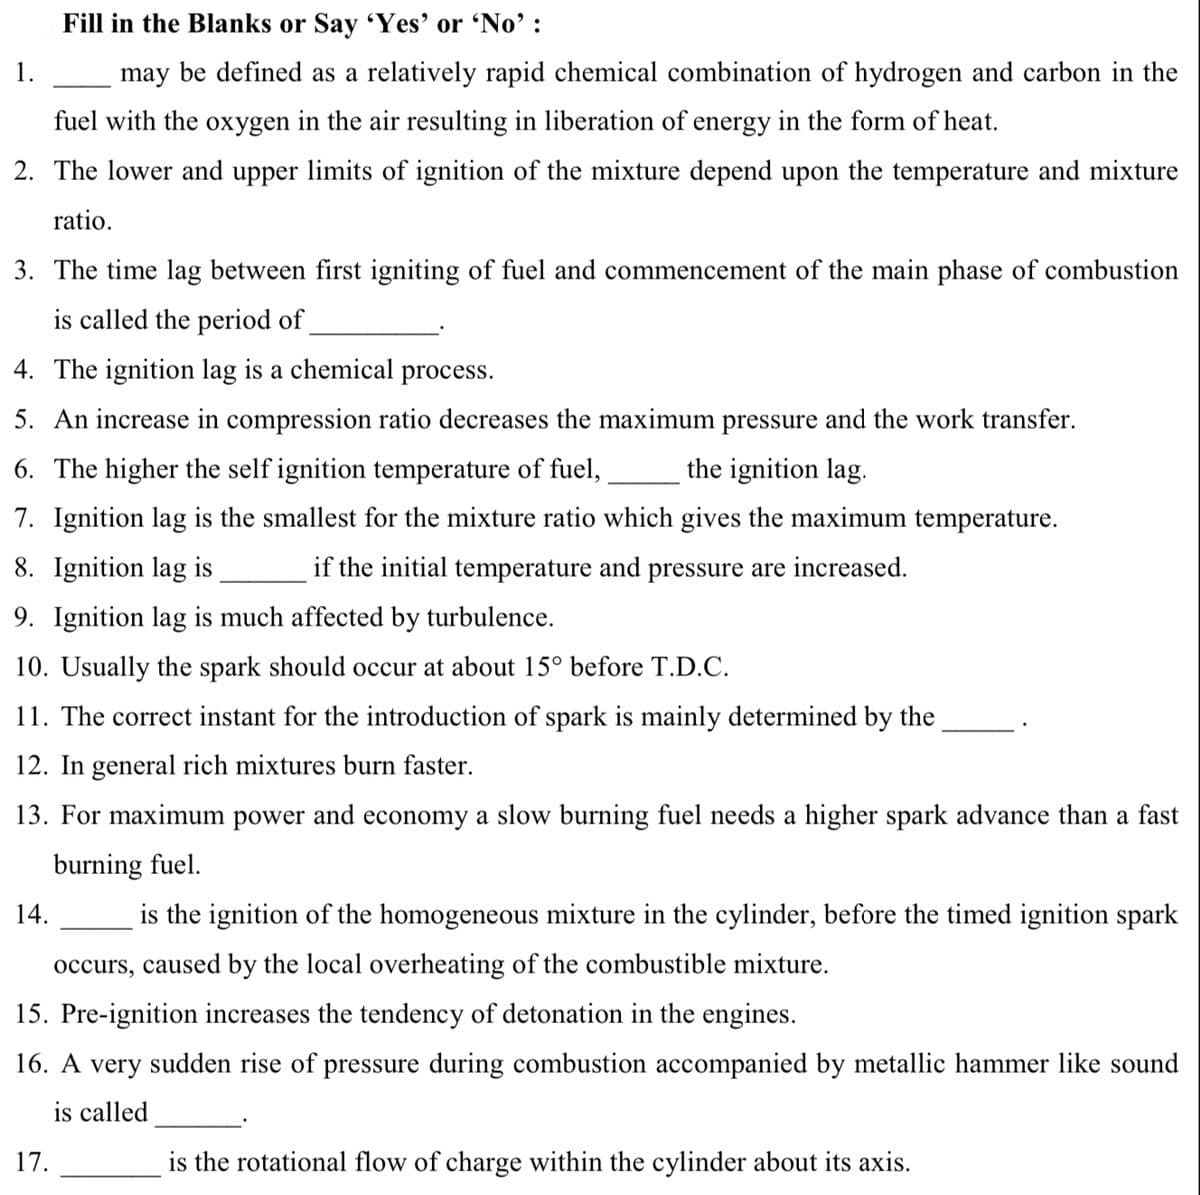 Fill in the Blanks or Say Yes' or 'No' :
1.
may be defined as a relatively rapid chemical combination of hydrogen and carbon in the
fuel with the oxygen in the air resulting in liberation of energy in the form of heat.
2. The lower and upper limits of ignition of the mixture depend upon the temperature and mixture
ratio.
3. The time lag between first igniting of fuel and commencement of the main phase of combustion
is called the period of
4. The ignition lag
a chemical process.
5. An increase in compression ratio decreases the maximum pressure and the work transfer.
6. The higher the self ignition temperature of fuel,
the ignition lag.
7. Ignition lag is the smallest for the mixture ratio which gives the maximum temperature.
8. Ignition lag is
if the initial temperature and pressure are increased.
9. Ignition lag is much affected by turbulence.
10. Usually the spark should occur at about 15° before T.D.C.
11. The correct instant for the introduction of spark is mainly determined by the
12. In general rich mixtures burn faster.
13. For maximum power and economy a slow burning fuel needs a higher spark advance than a fast
burning fuel.
14.
is the ignition of the homogeneous mixture in the cylinder, before the timed ignition spark
occurs, caused by the local overheating of the combustible mixture.
15. Pre-ignition increases the tendency of detonation in the engines.
16. A very sudden rise of pressure during combustion accompanied by metallic hammer like sound
is called
17.
is the rotational flow of charge within the cylinder about its axis.
